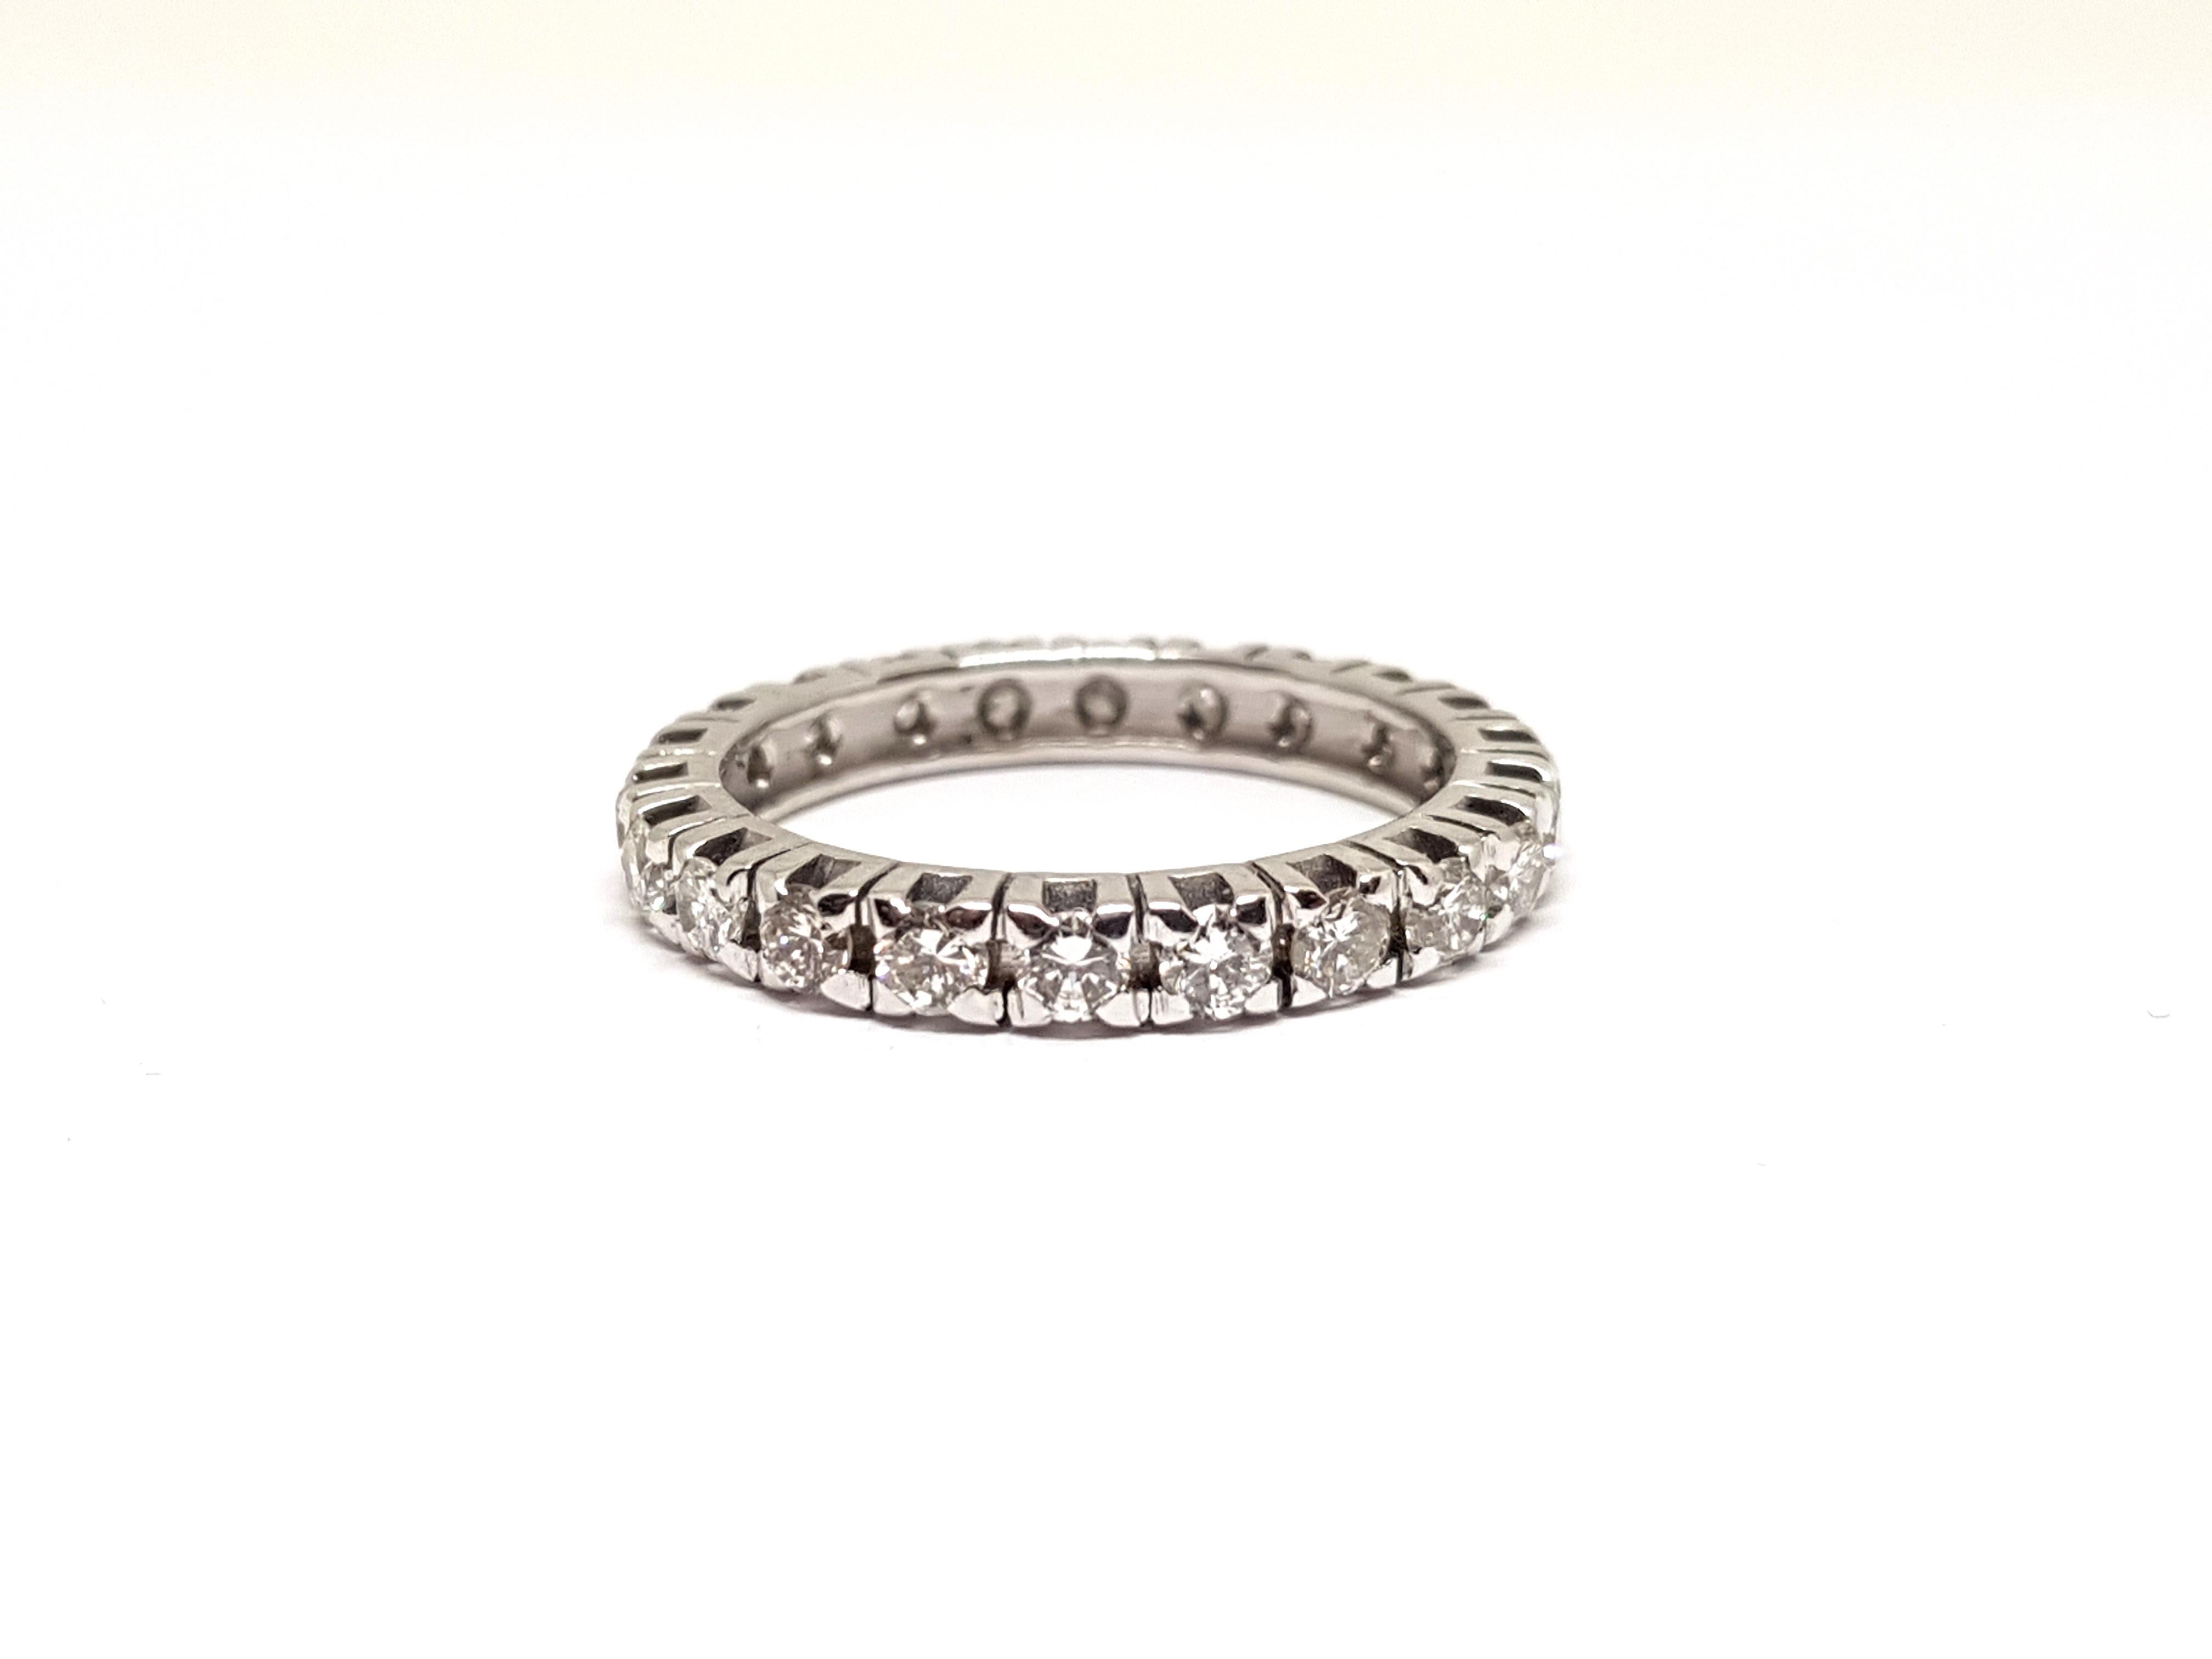 Gold: 18 Karat White Gold 
Weight: 2.70gr. 
Diamonds: 1.20ct. Colour: G Clarity: VS1 
Width: 0.28 cm. 
Ring size: 50 / 15.75mm / US 5.25
Free resizing of Ring up to size 60 / 19mm / US 9 
All our jewellery comes with a certificate and 5 years